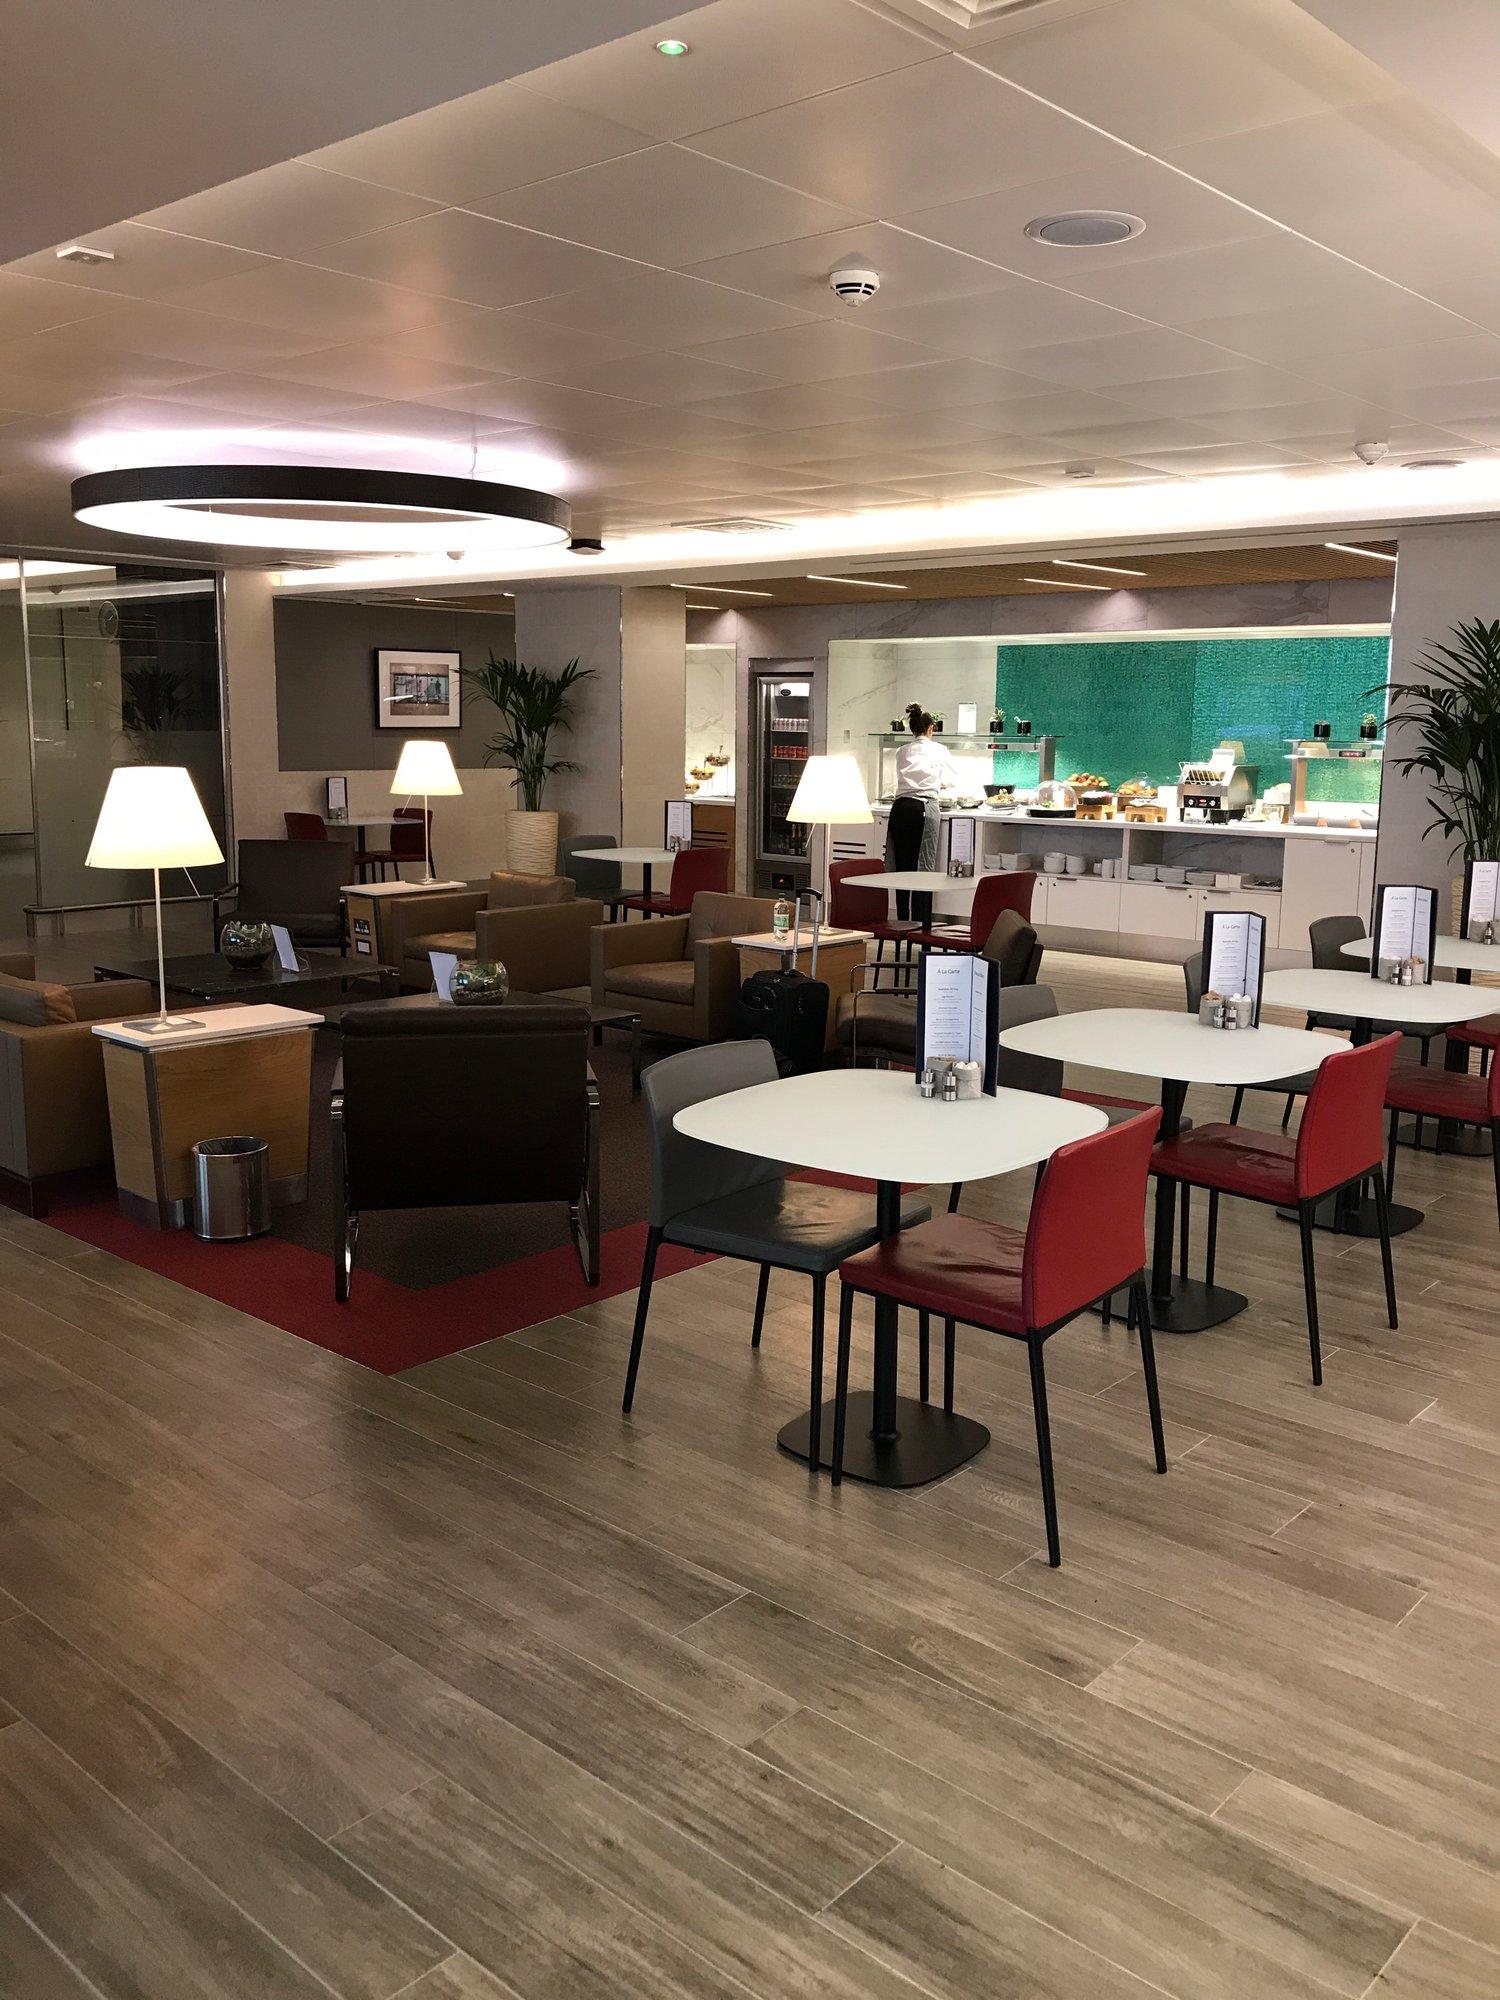 American Airlines Arrivals Lounge image 3 of 10